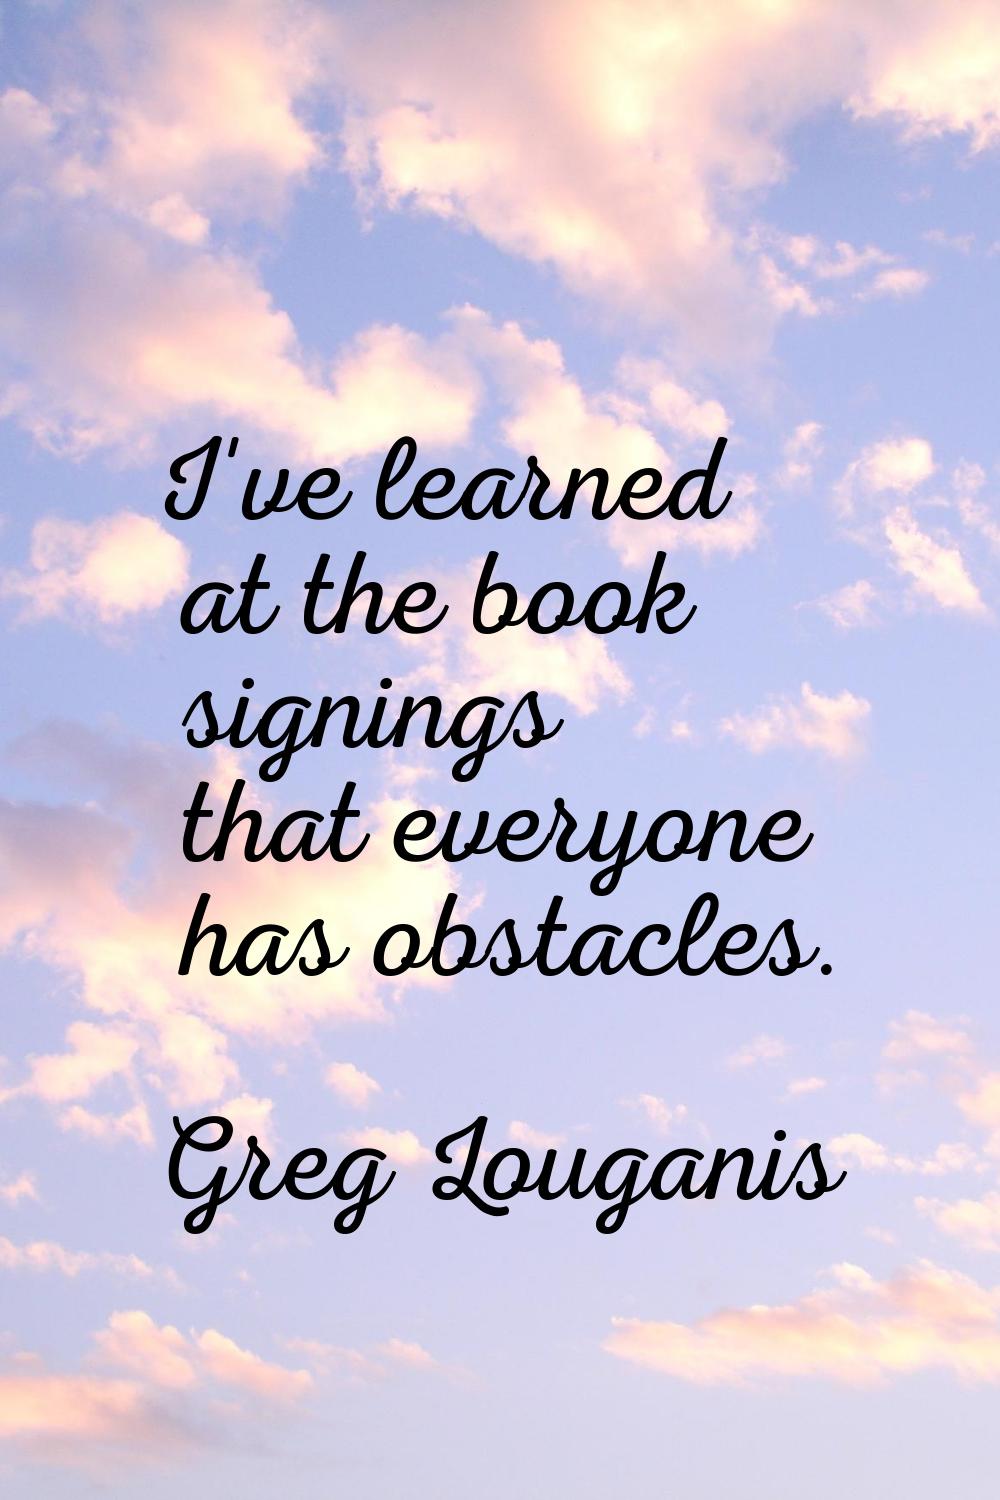 I've learned at the book signings that everyone has obstacles.